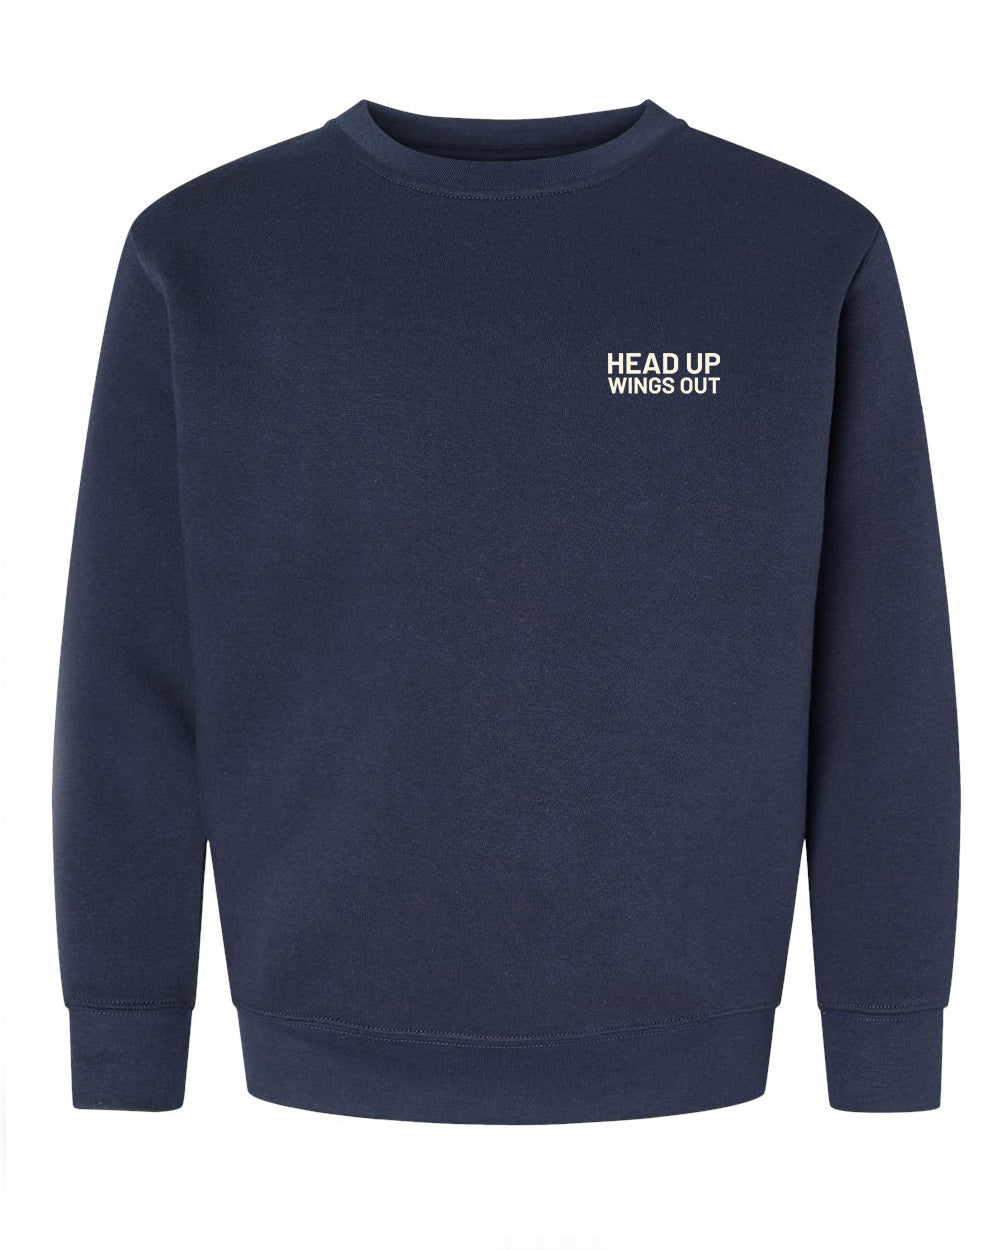 Head Up Wings Out Youth Unisex Fleece Crewneck by Seen Not Seen